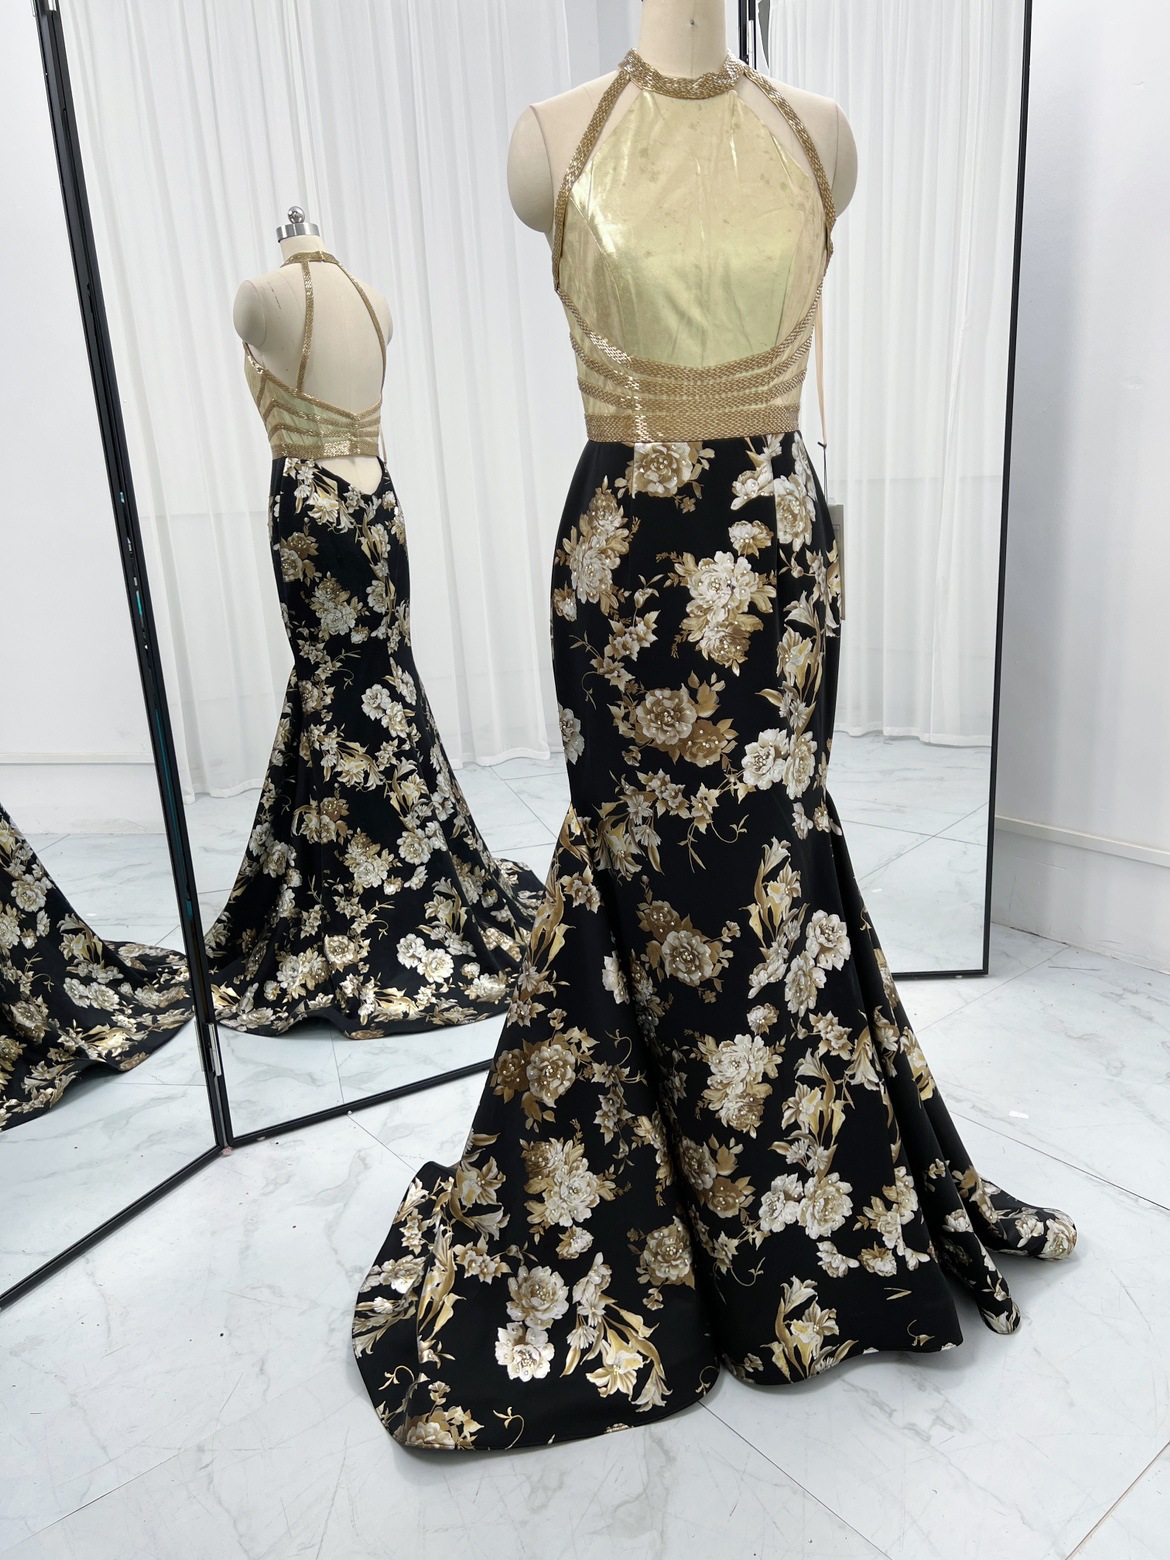 Floral Print Trumpet Prom Dress With Gold Velet Bodice